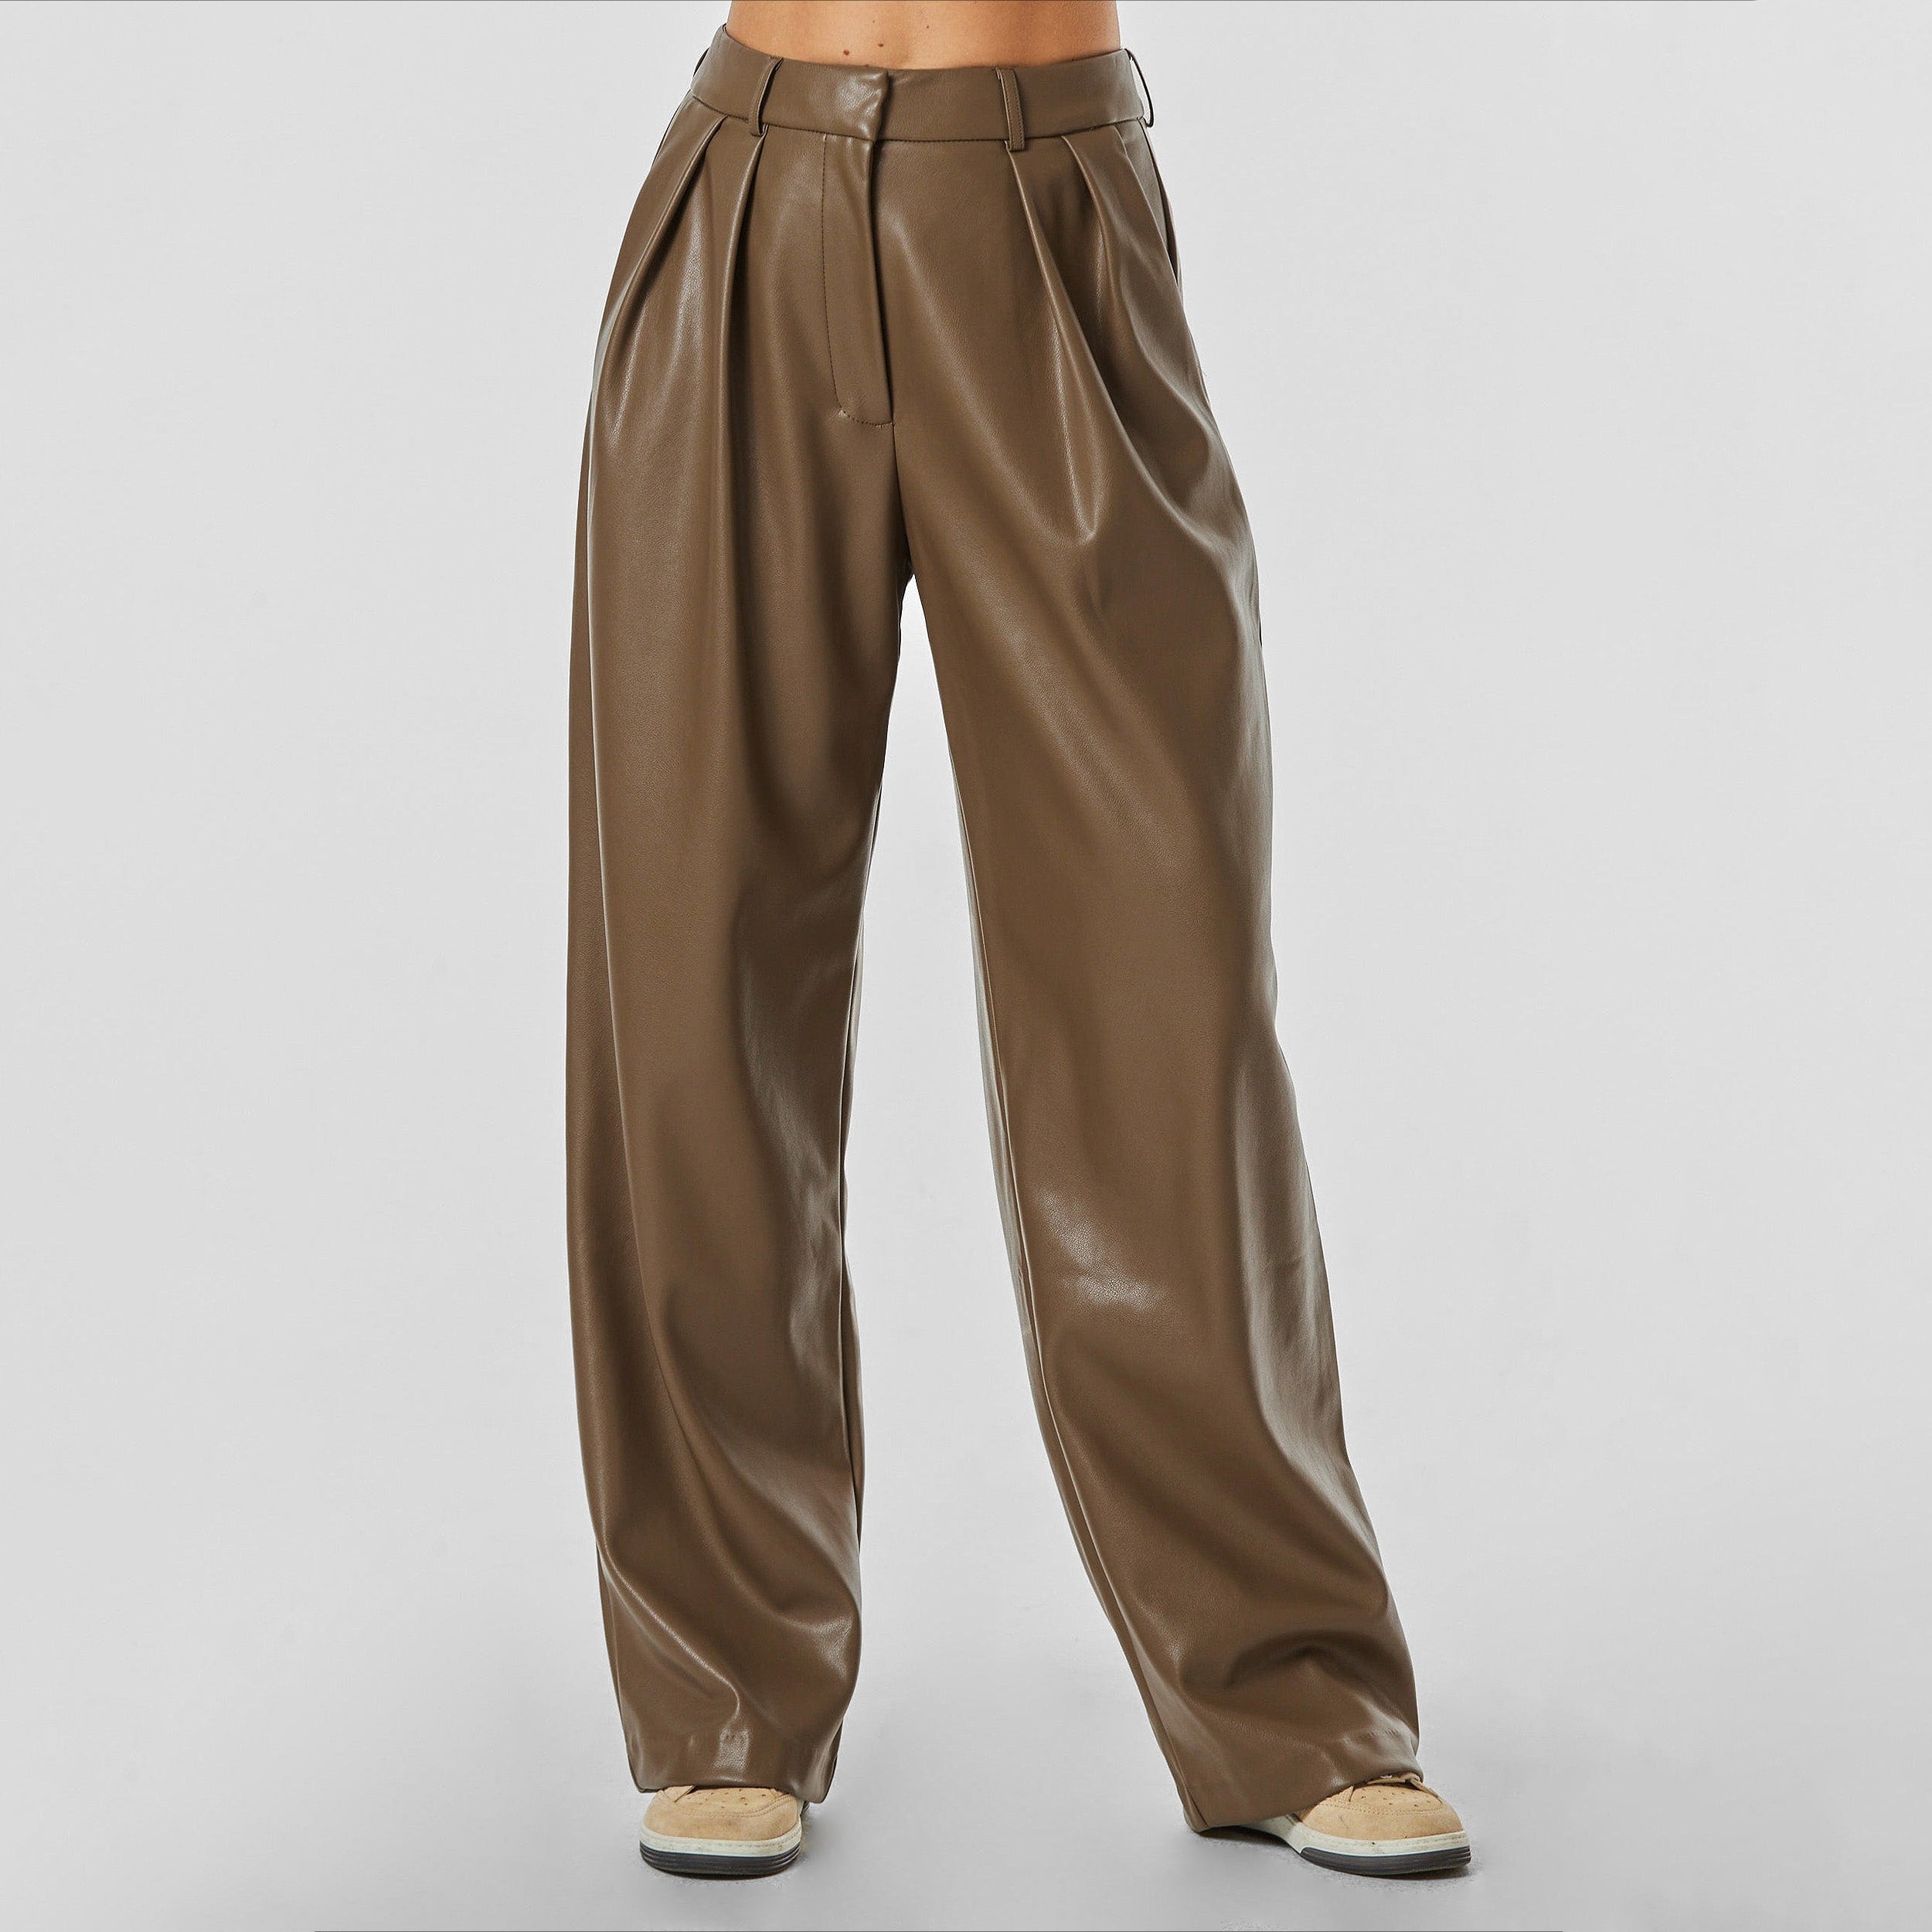 Front view of woman wearing brown high rise vegan leather pleated trousers.